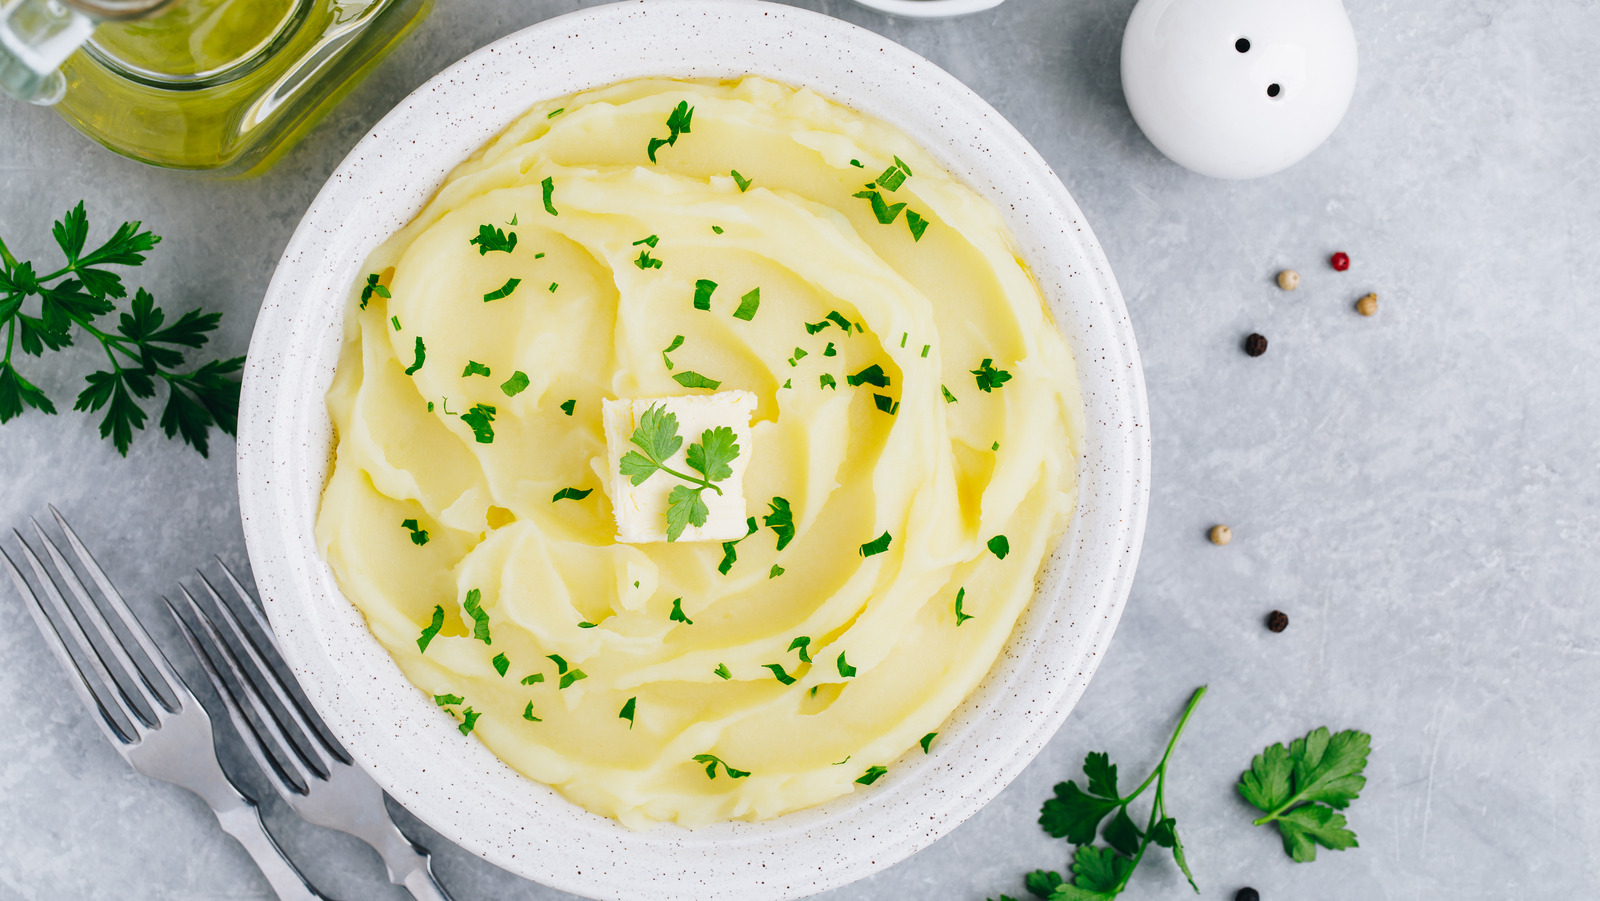 https://www.tastingtable.com/img/gallery/the-scientifically-proven-ingredient-for-the-smoothest-mashed-potatoes/l-intro-1670420192.jpg